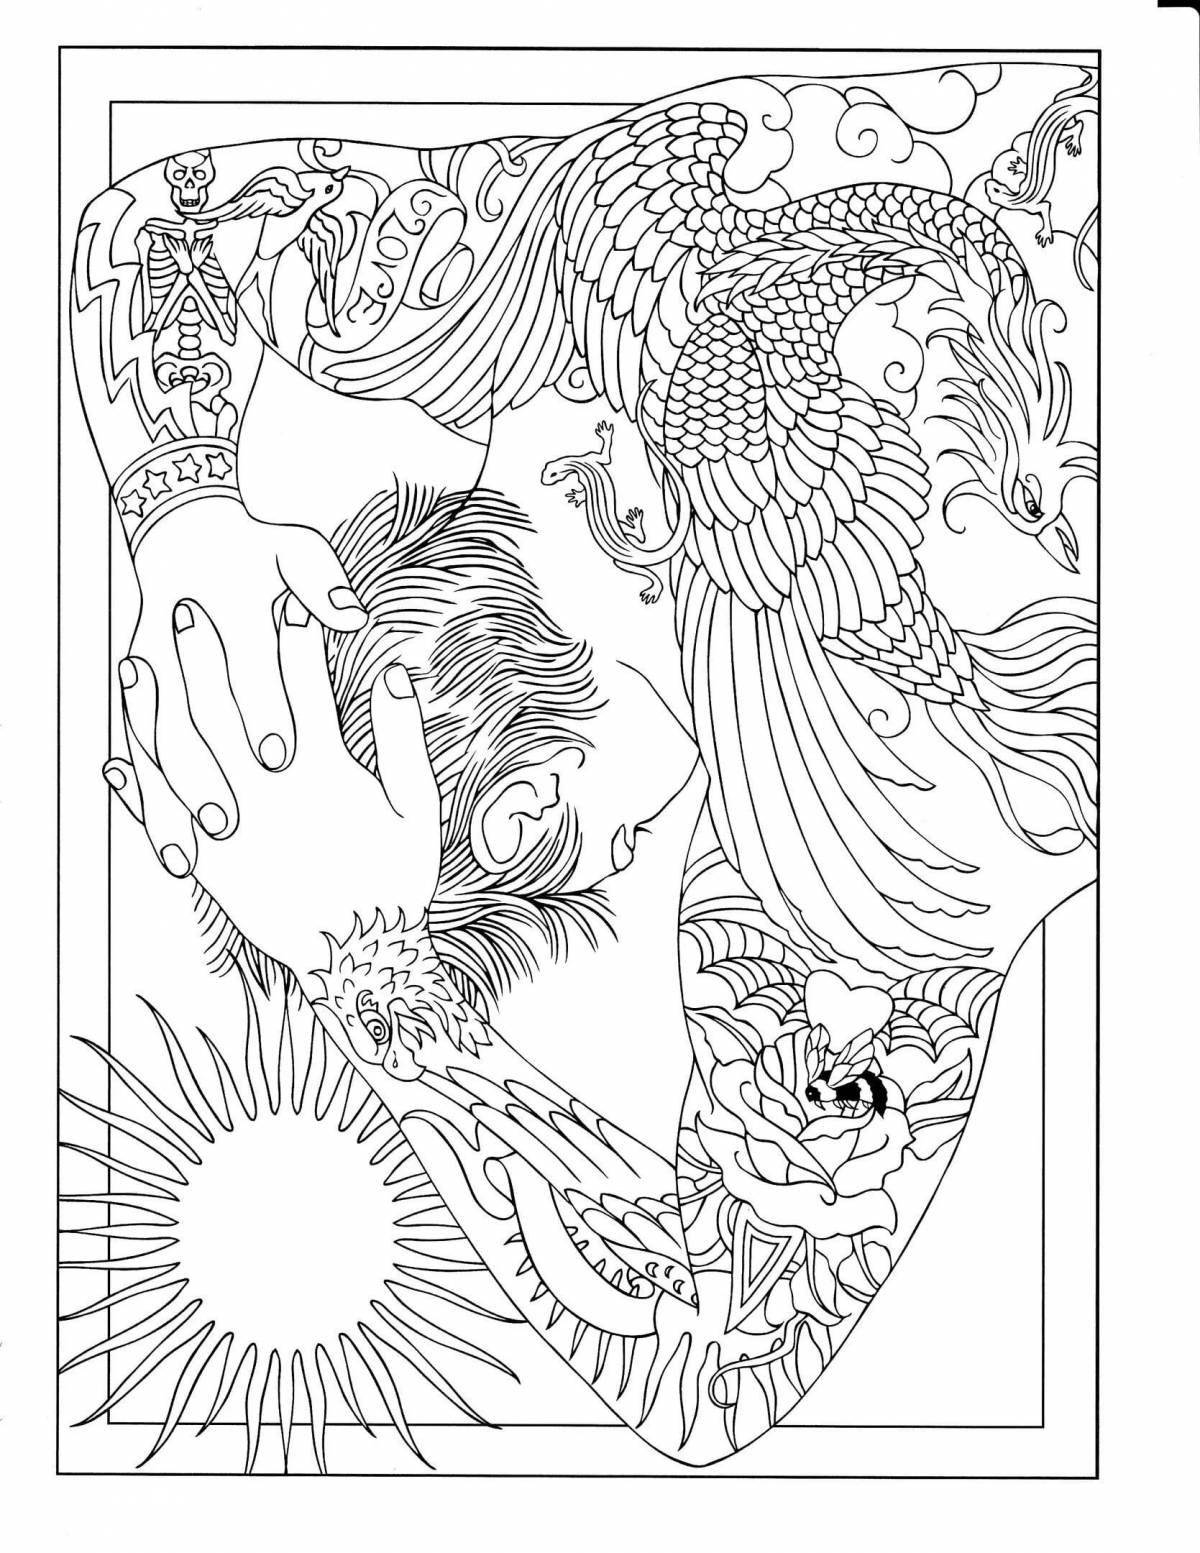 Soothing psychological coloring book for adults